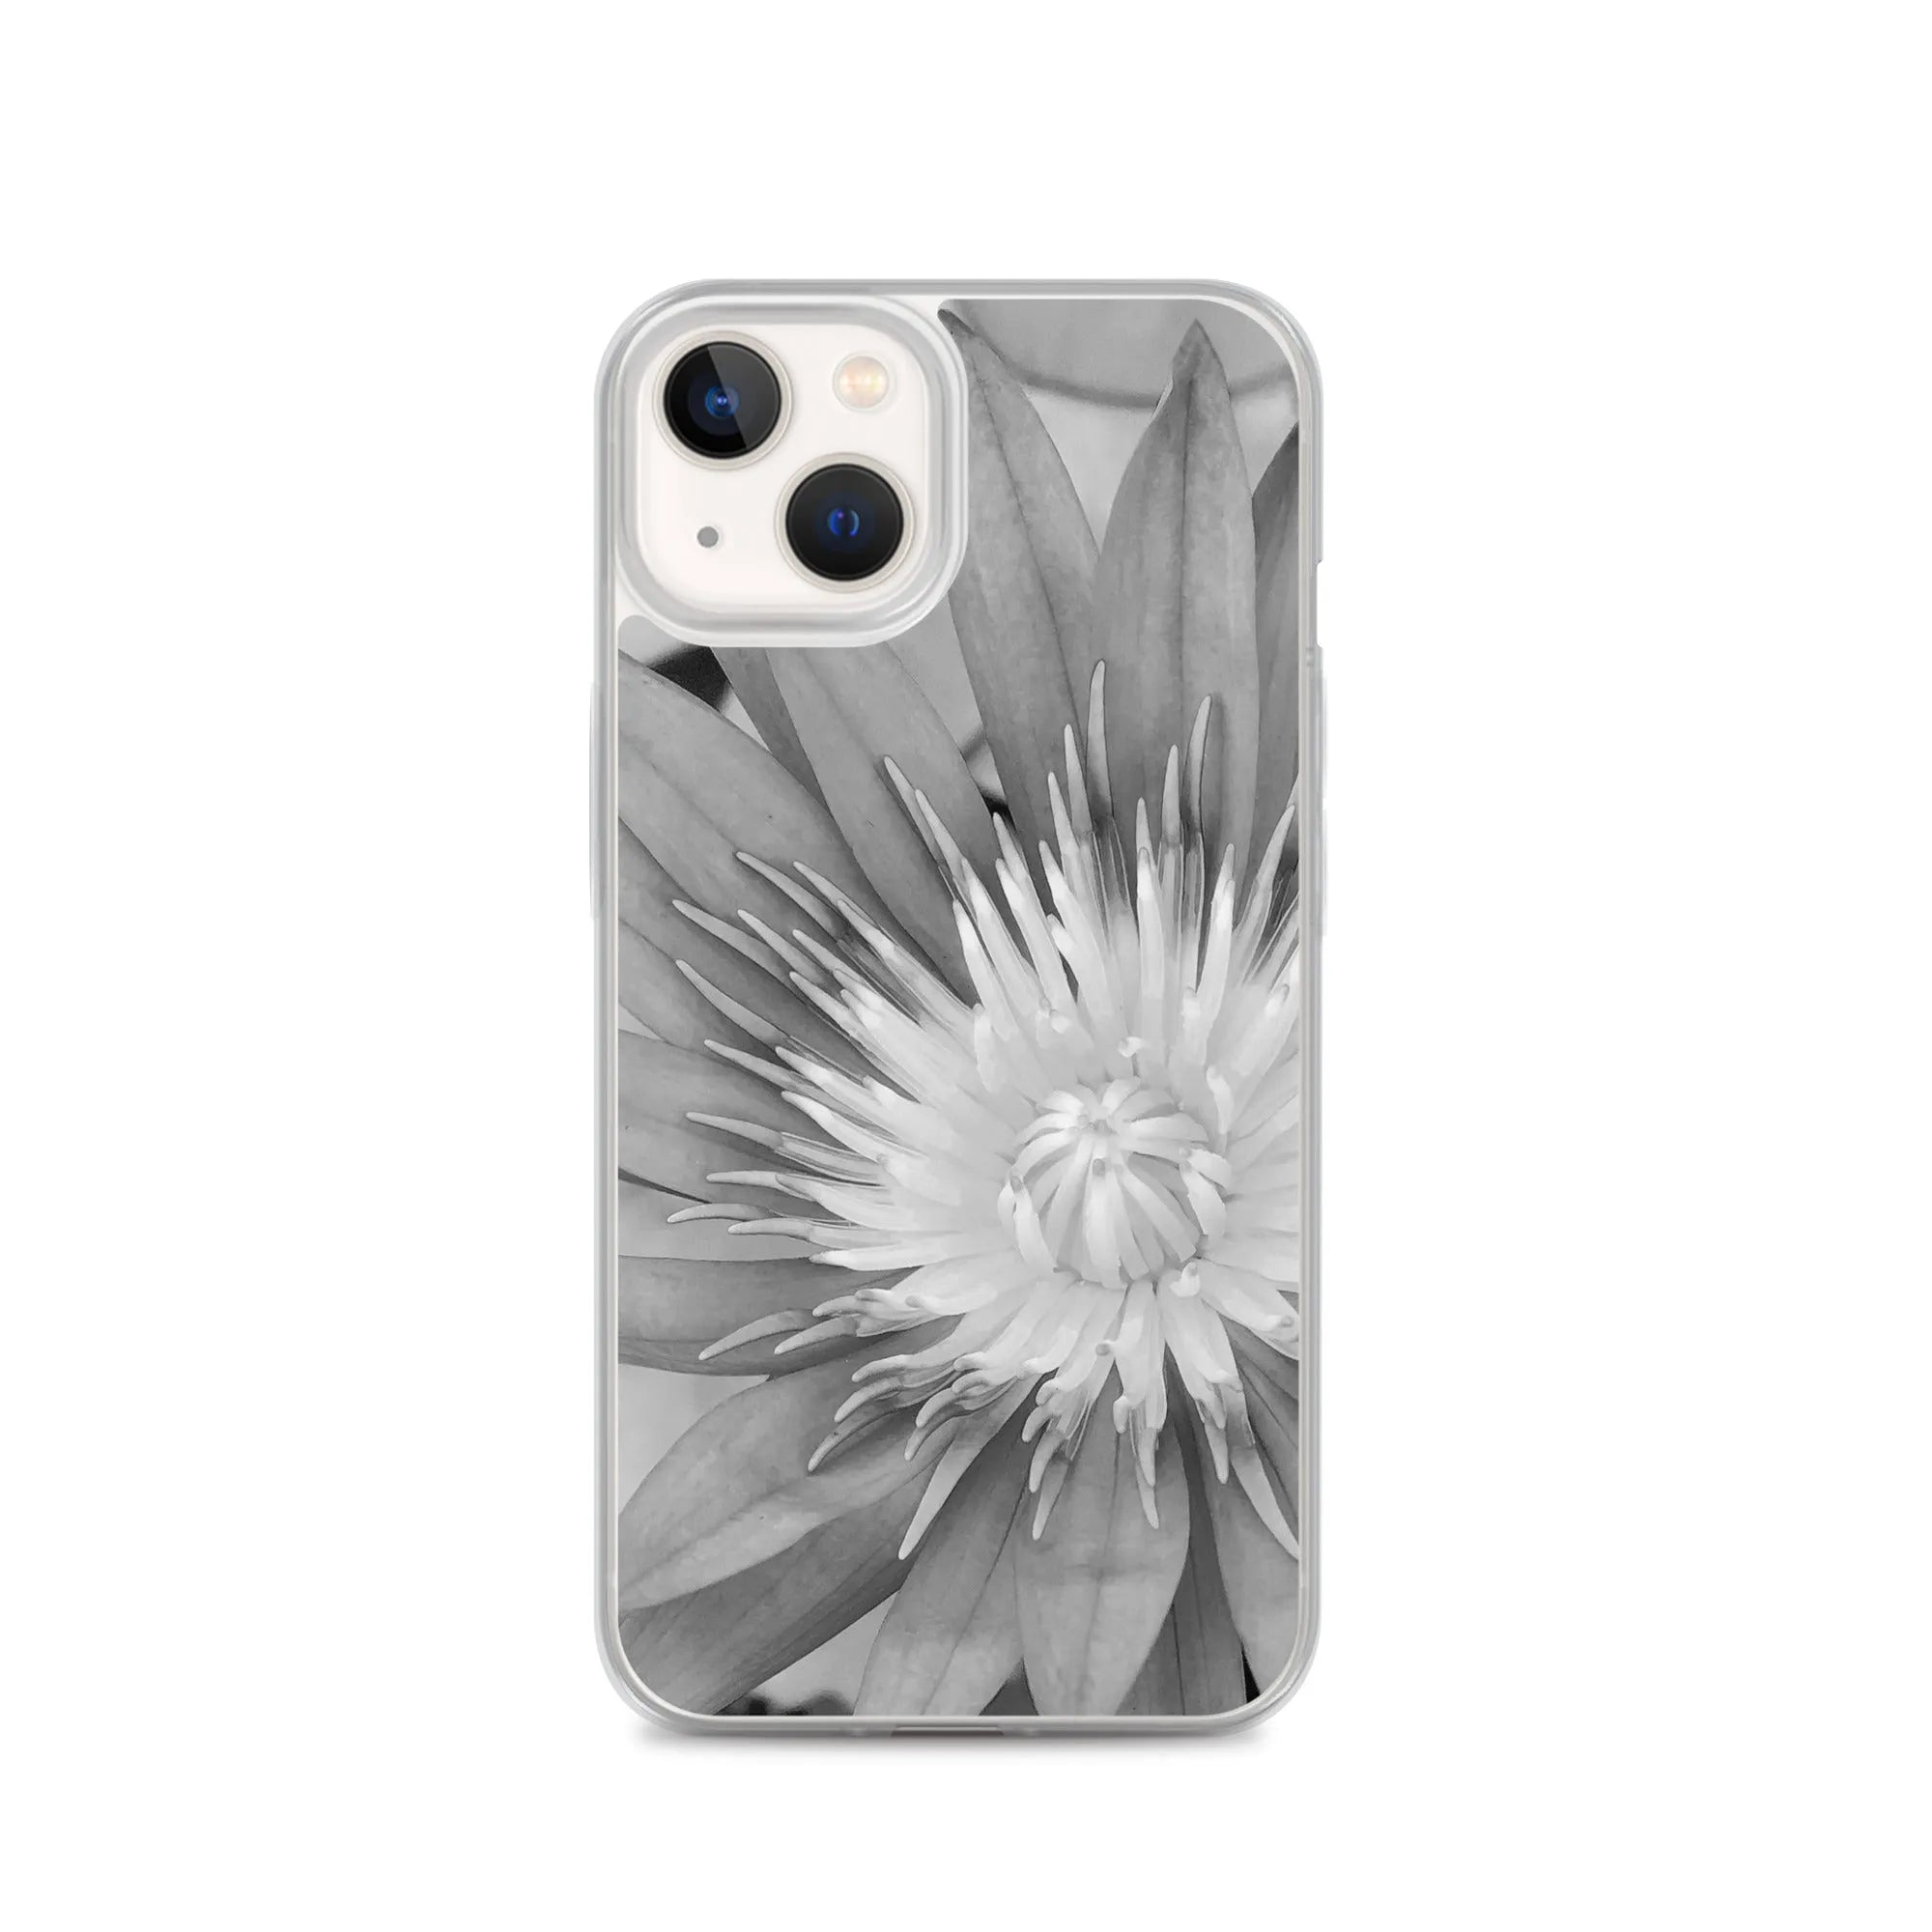 Lilliput Floral Iphone Case - Black And White - Iphone 13 - Mobile Phone Cases - Aesthetic Art